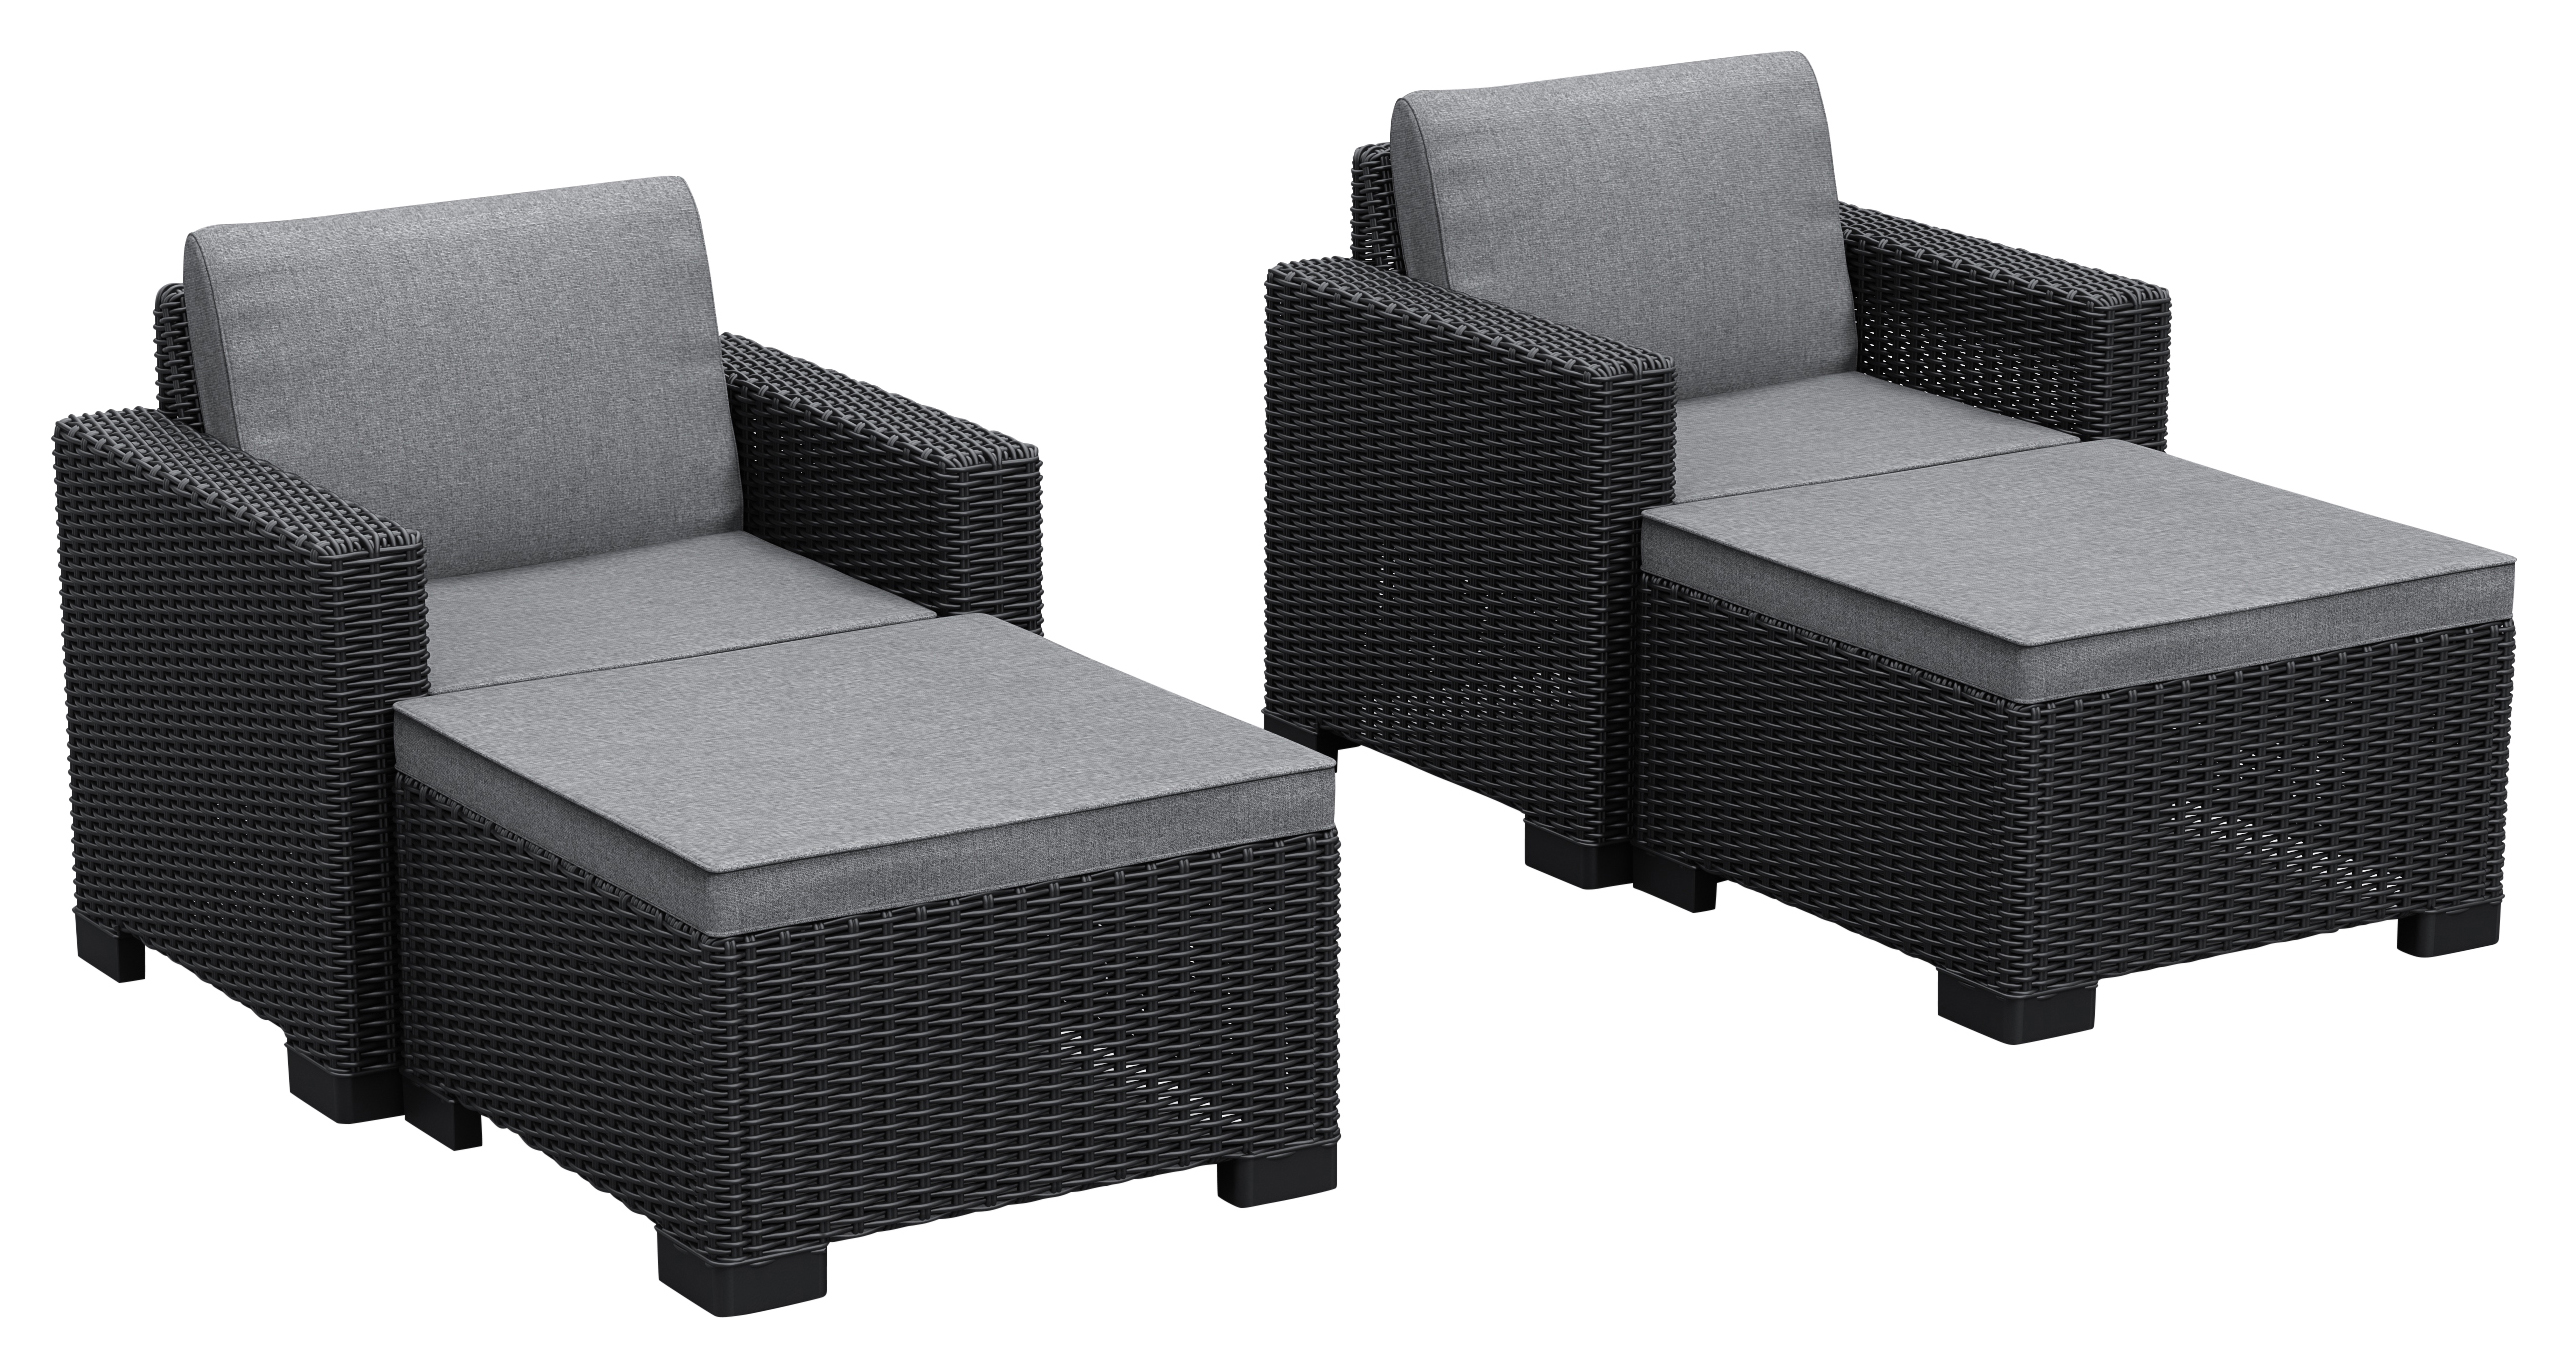 Image of Keter California 2 Seater Outdoor Balcony Deluxe Garden Furniture Set - Graphite with Grey Cushions